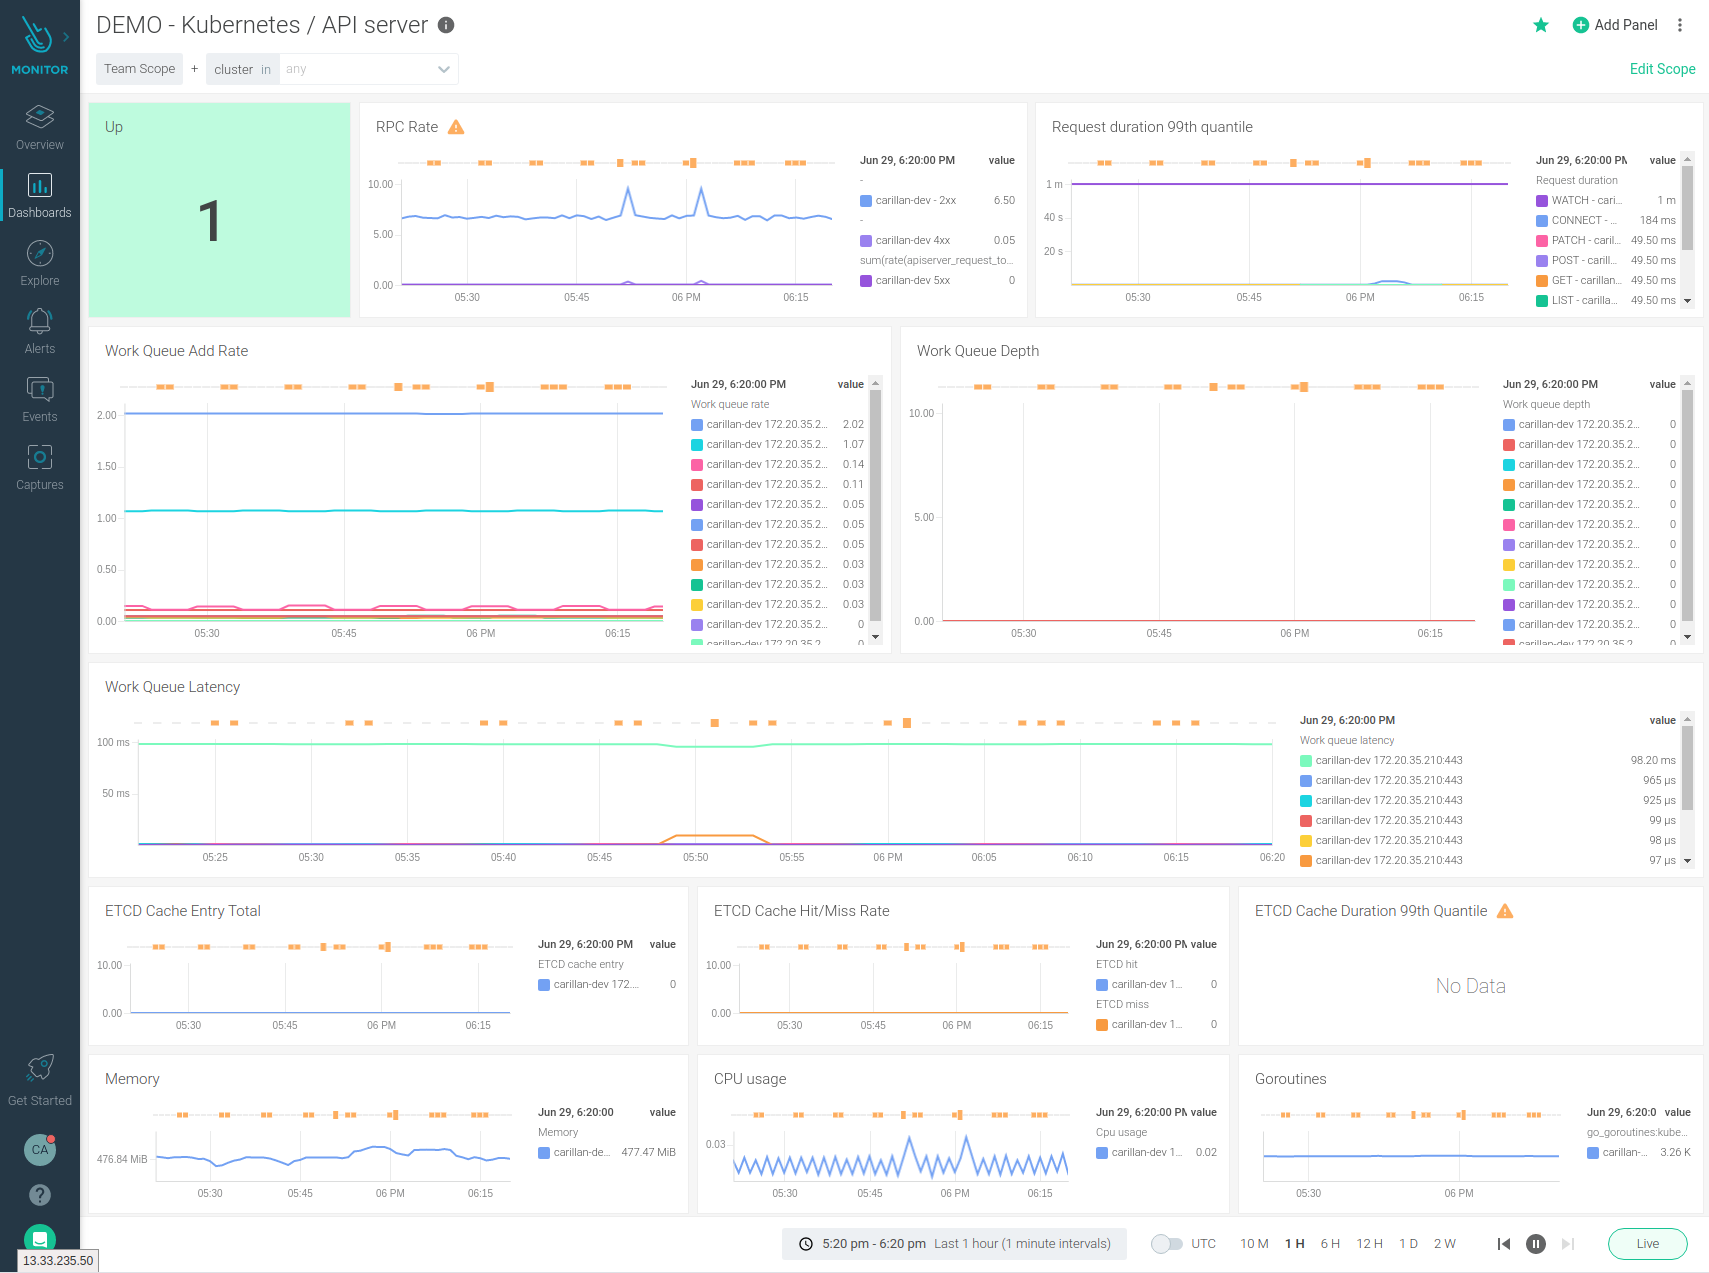 A Kubernetes monitoring dashboard of the API server. It tracks metrics like: Is it up? RPC Rate, Rquest duration, Work Queue add rate, Work Queue Depth, Work Queue Latency and ETCD Cache entry total.